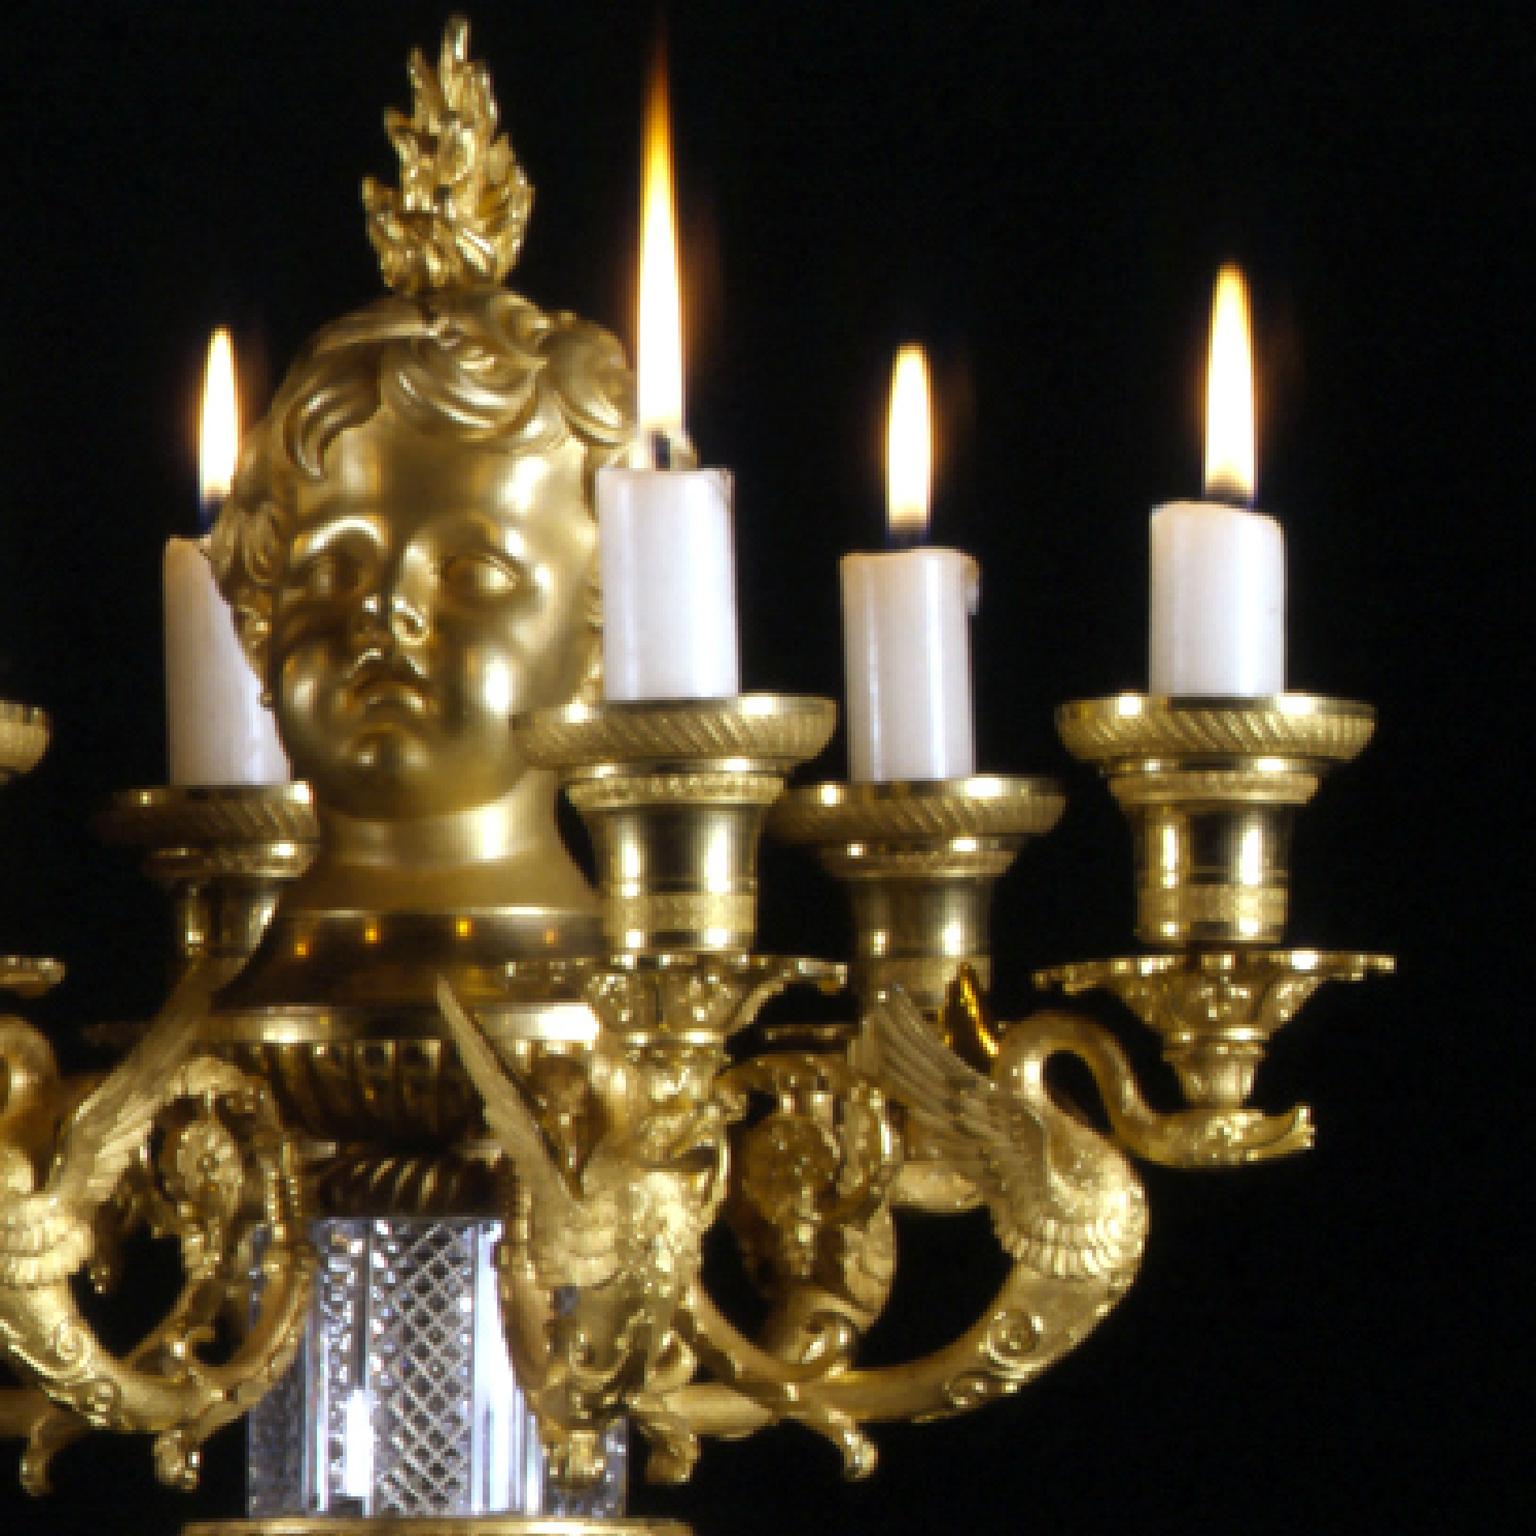 French Pair of Empire Six-Light Candelabra Attributed to Escalier De Cristal circa 1819 For Sale